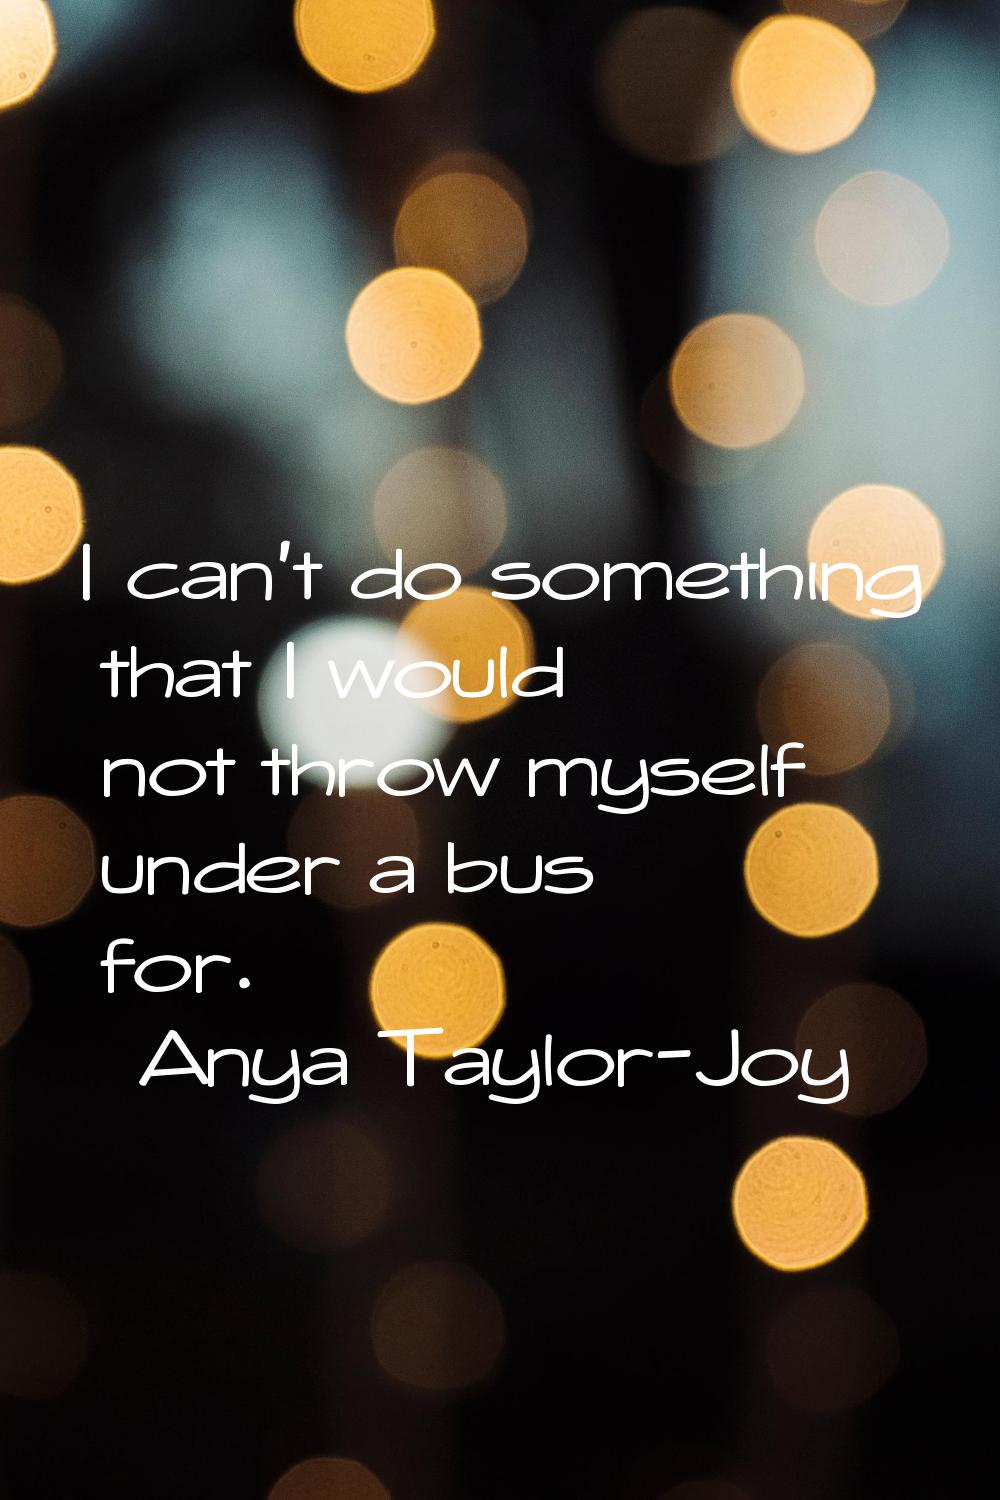 I can't do something that I would not throw myself under a bus for.